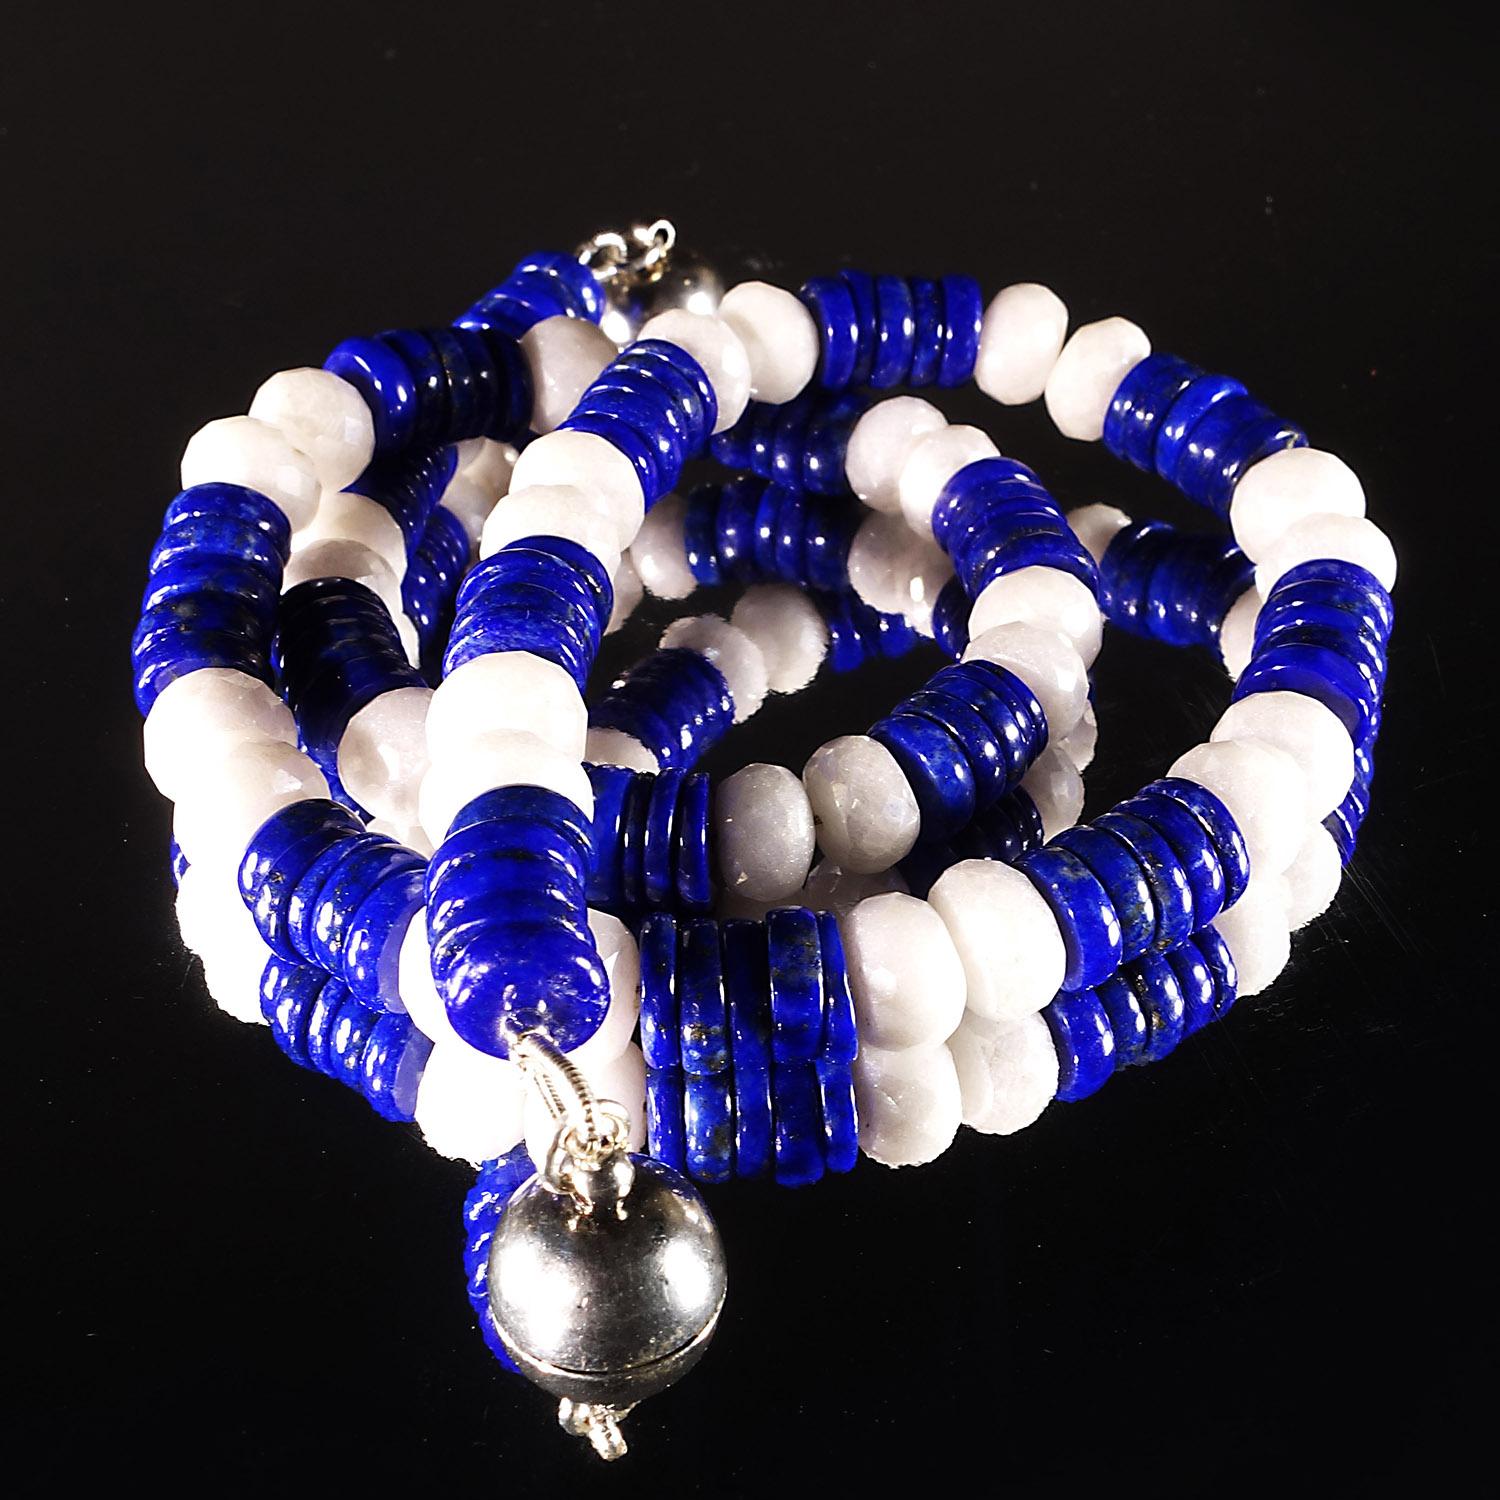 Handmade, sparkling necklace of natural blue Lapis Lazuli rondels (7mm) and faceted coated white Quartz rondels (8mm).  This striking choker is perfect for Spring and Summer.  Blue and White is so crisp and cool.  Wear this unique 15 inch choker